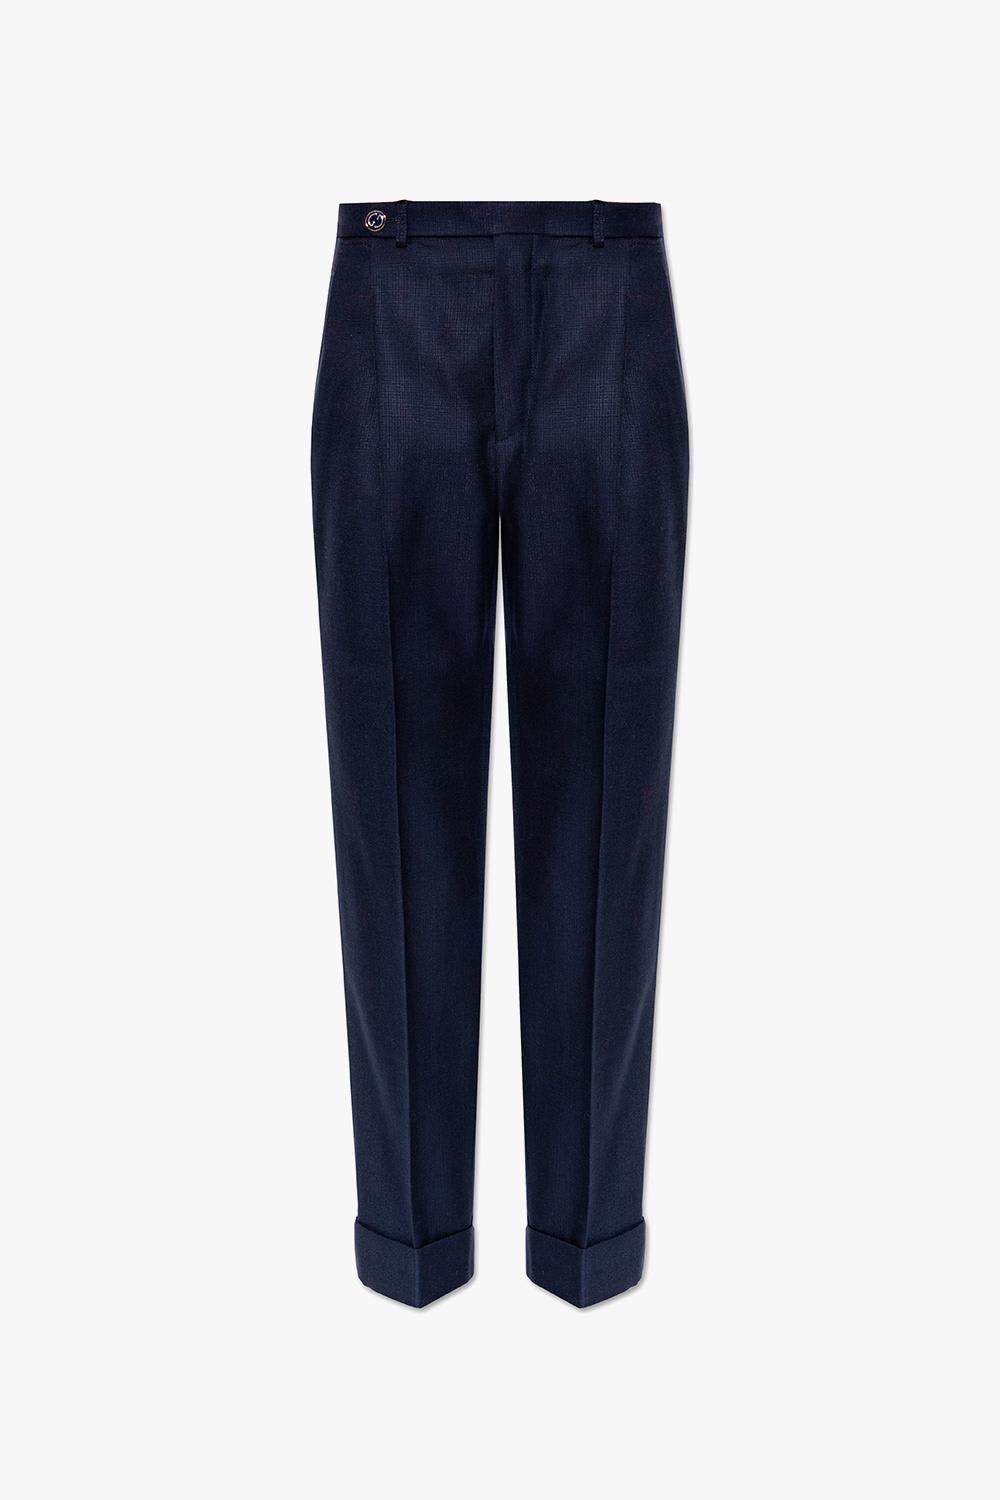 Gucci Pleat-front Trousers